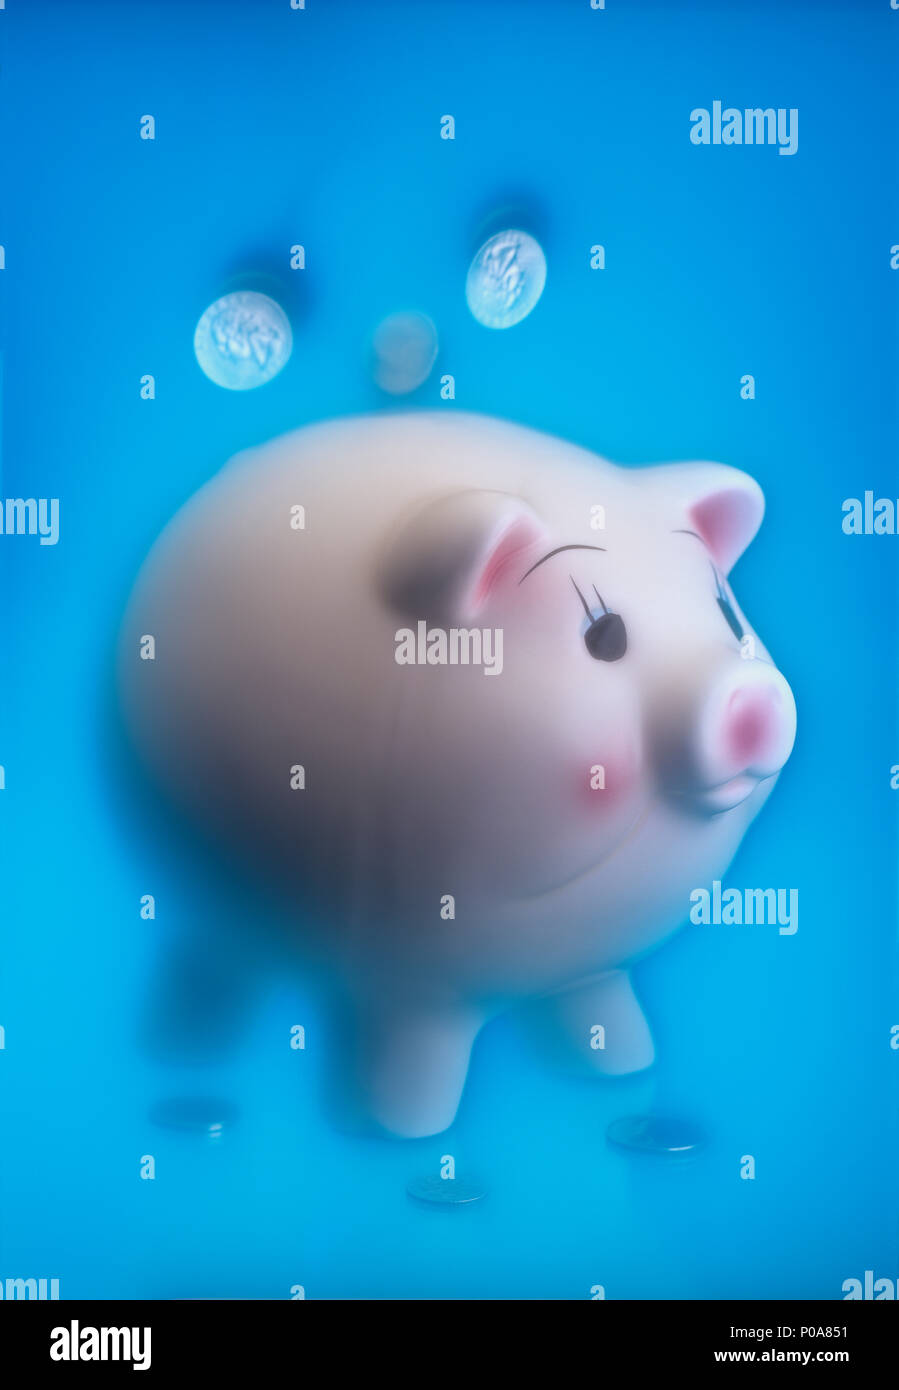 Conceptual image of coins falling from the sky into a piggy bank with a soft ethereal background Stock Photo